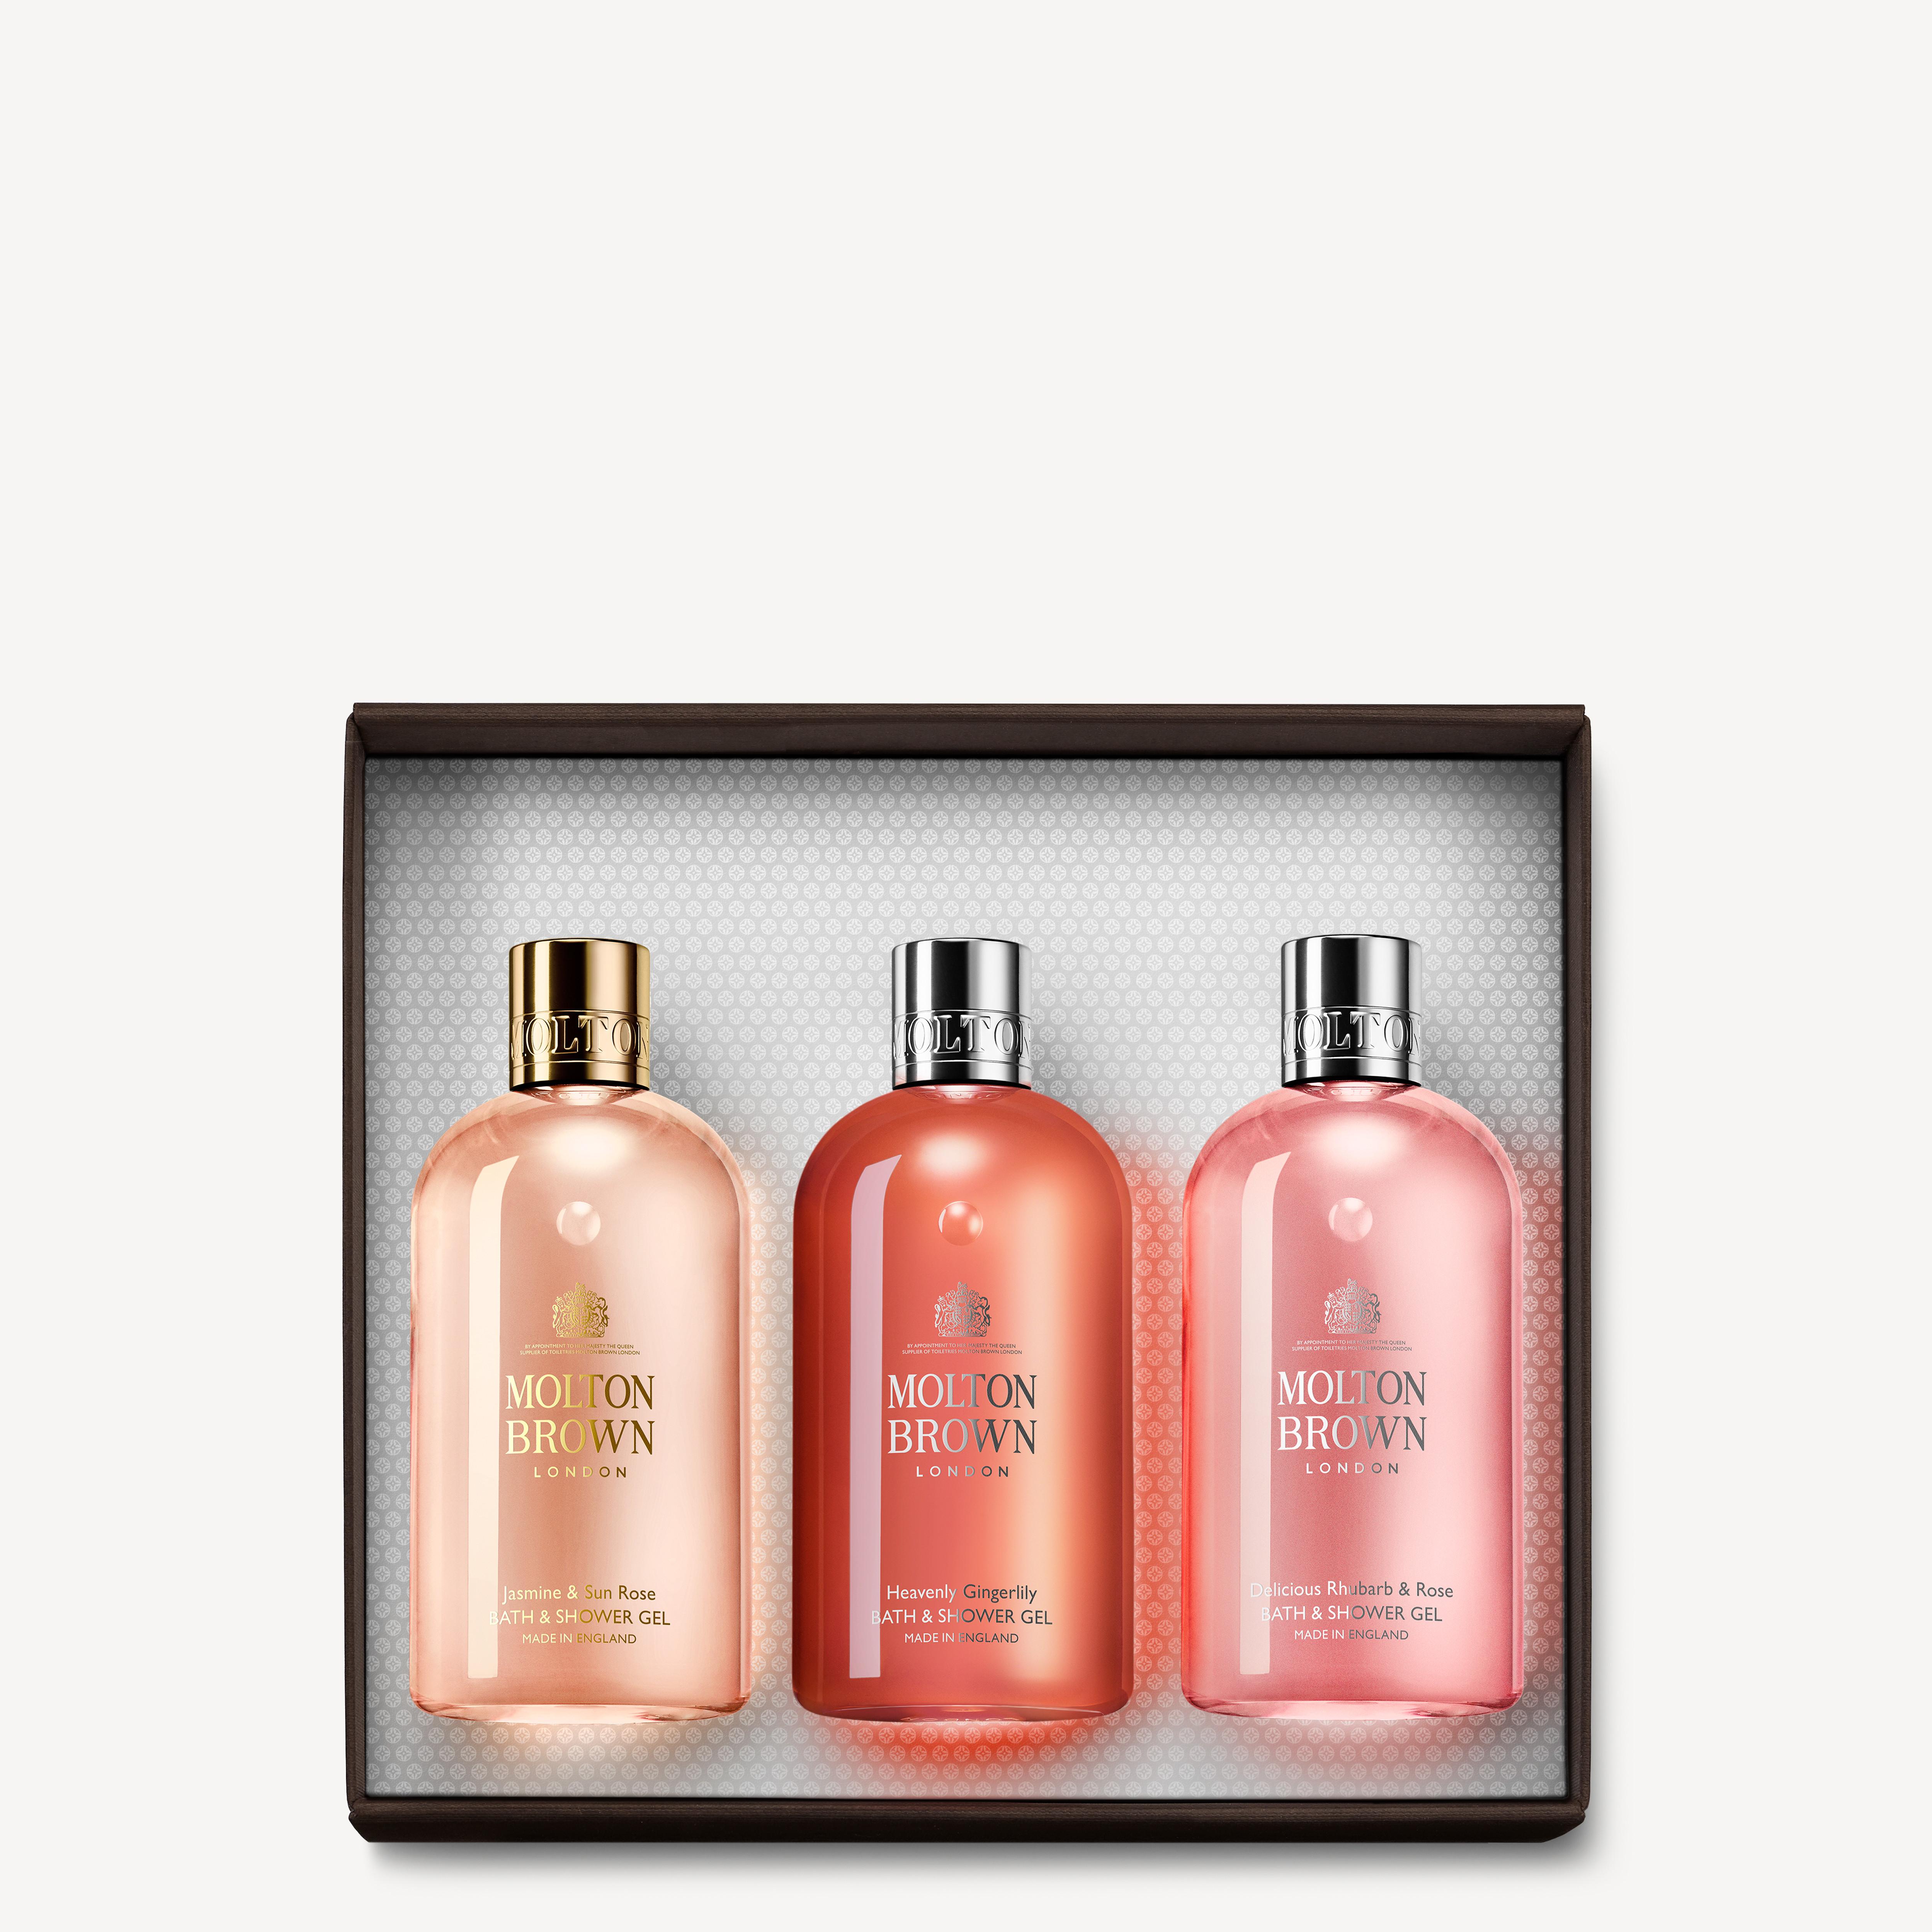 Molton Brown Floral & Fruity Body Care Gift Set